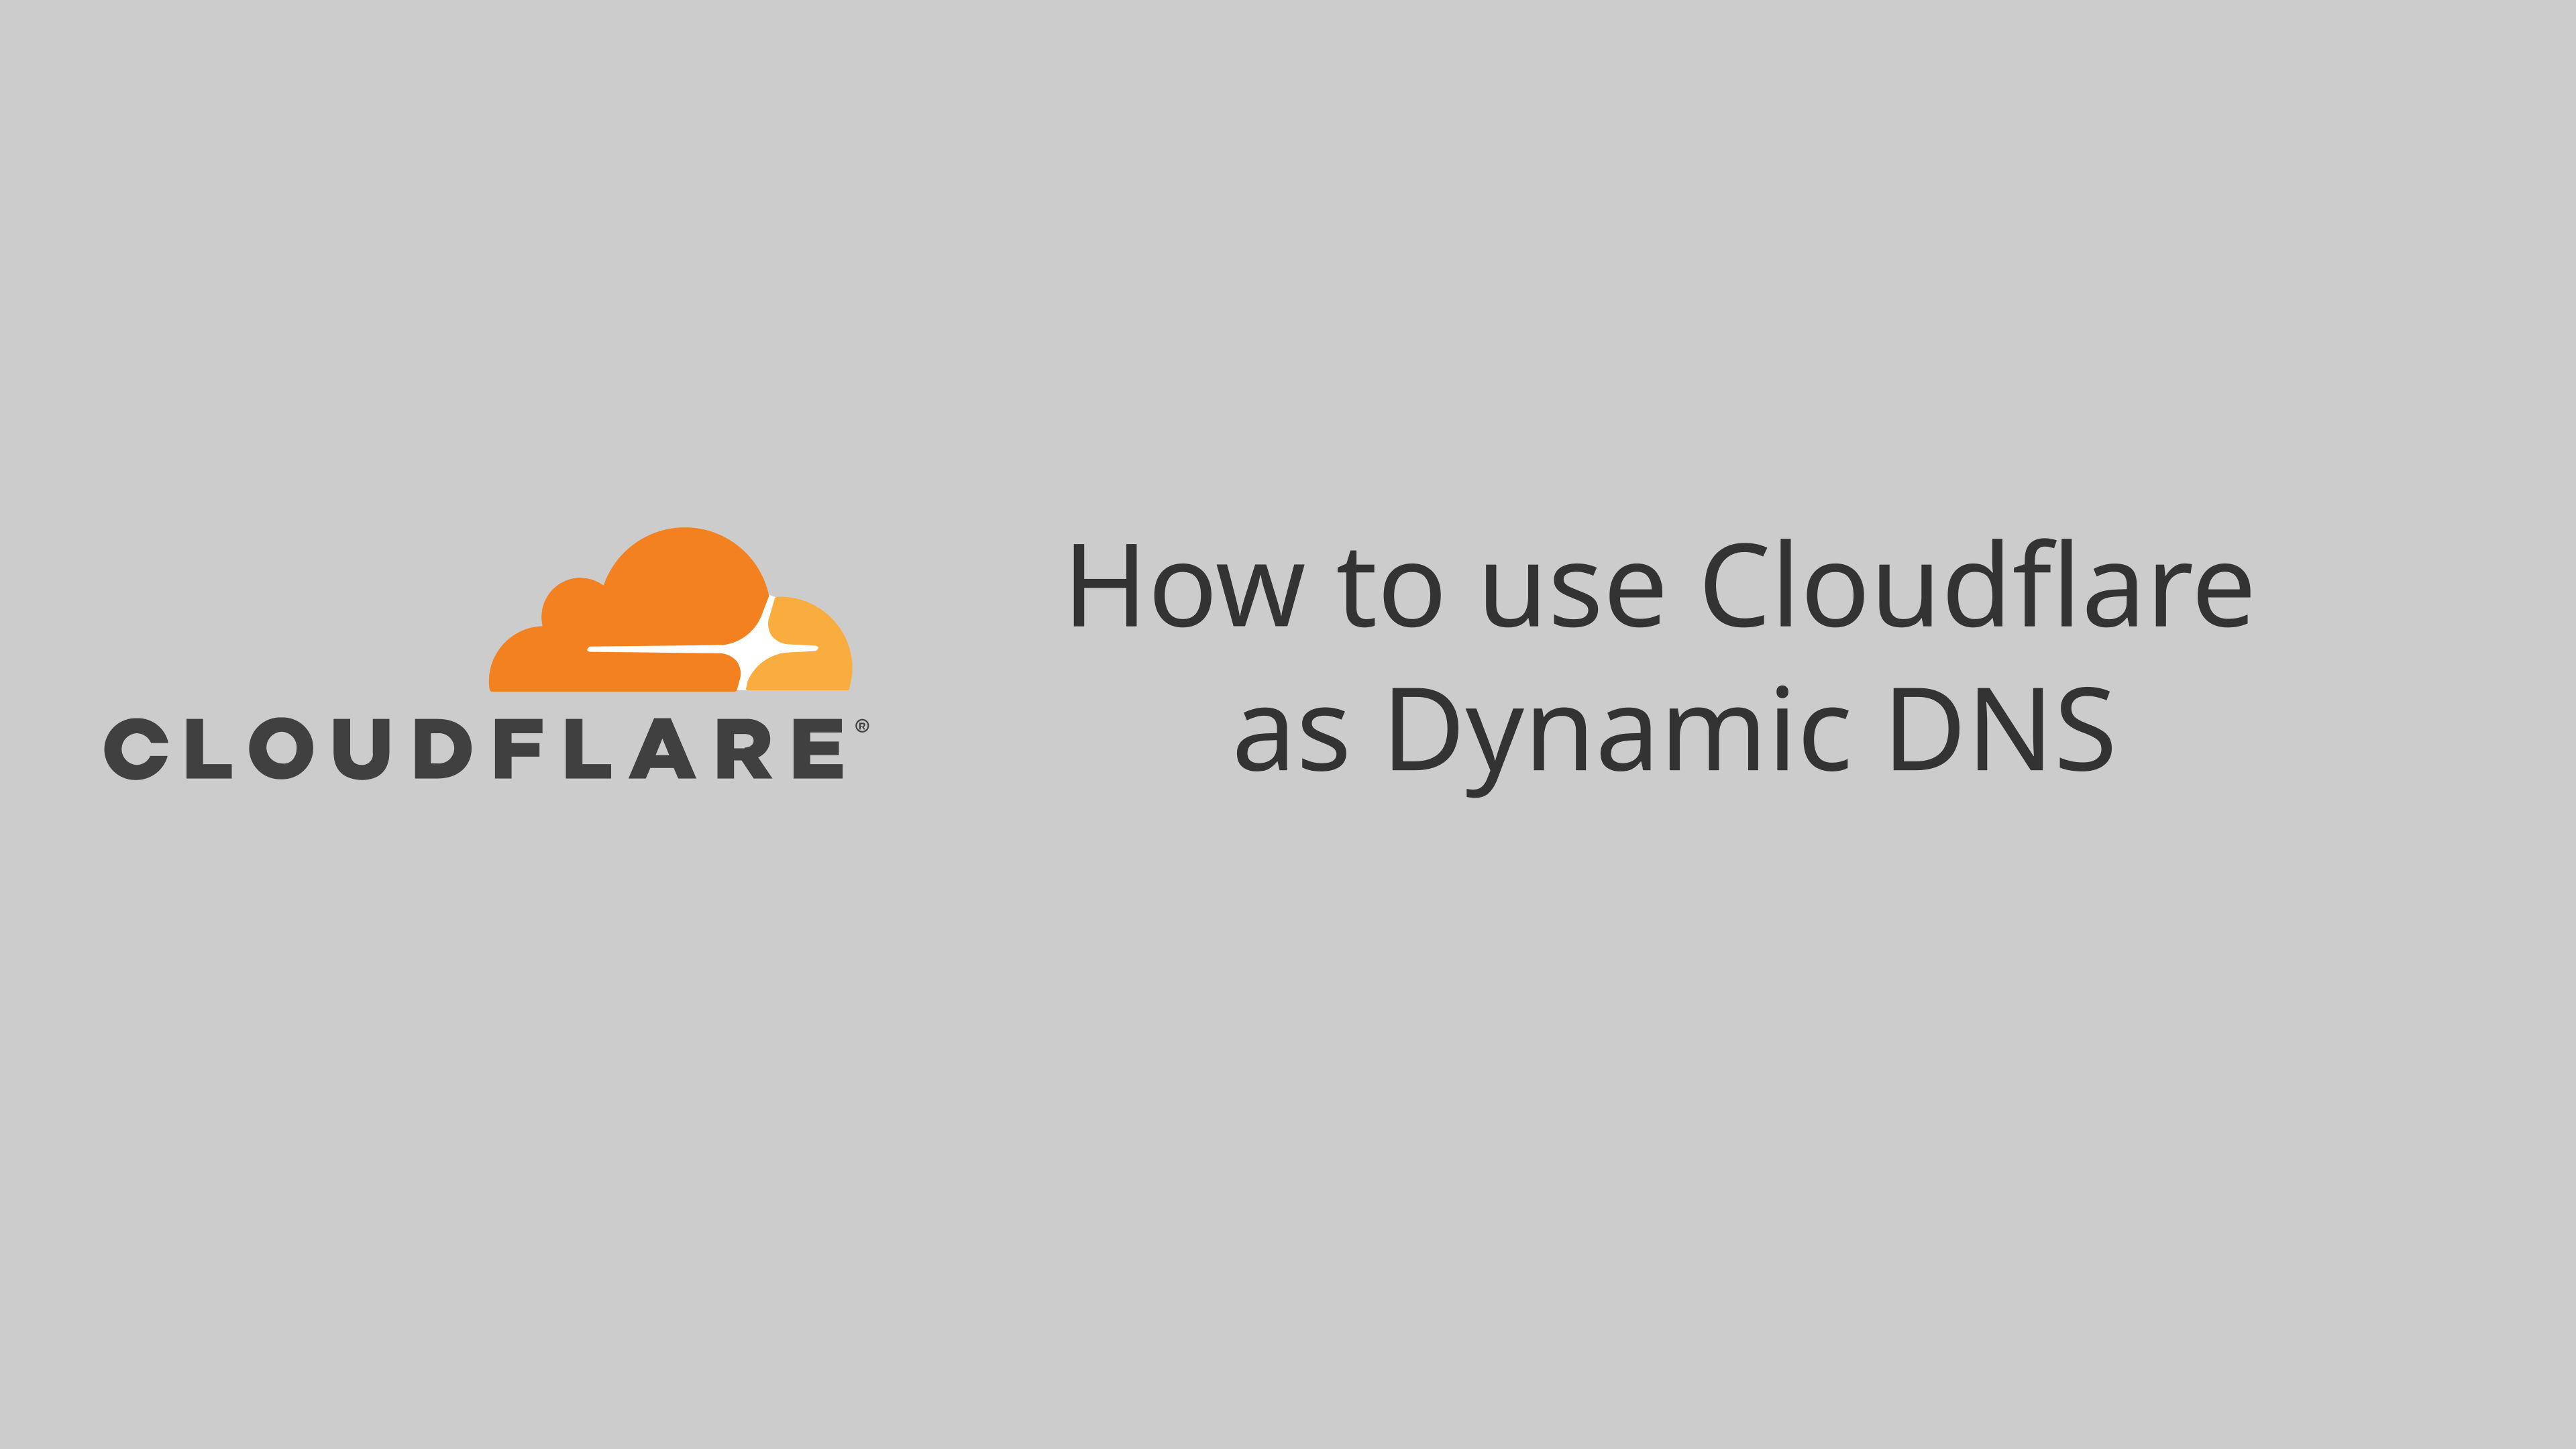 How to use Cloudflare as Dynamic DNS